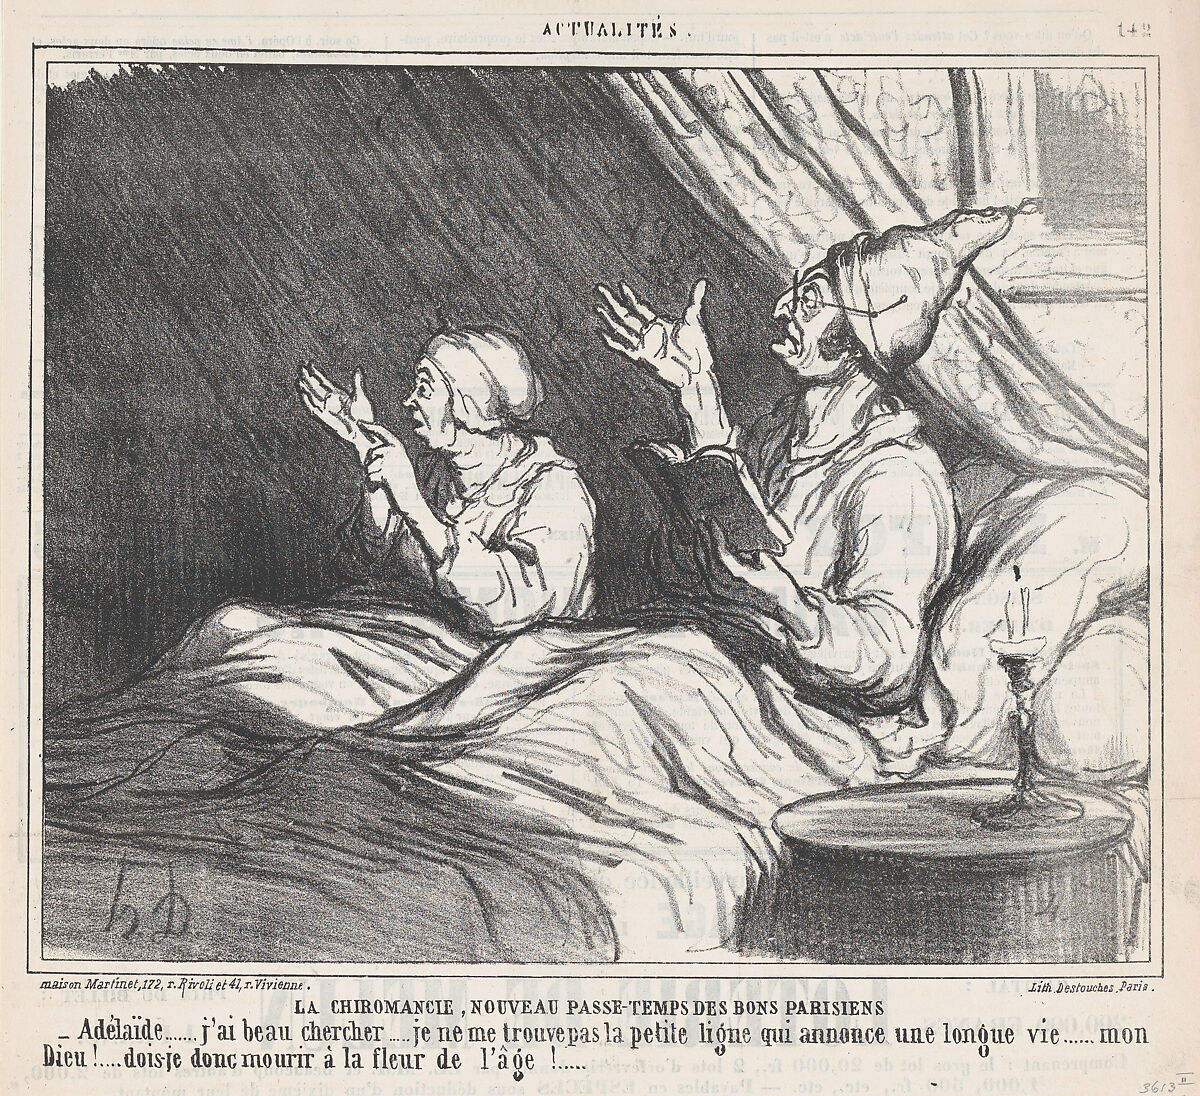 Palmistry, New Parisian Pastime, from 'News of the Day,' published in Le Charivari, February 1, 1860, Honoré Daumier (French, Marseilles 1808–1879 Valmondois), Lithograph on newsprint; second state of three (Delteil) 